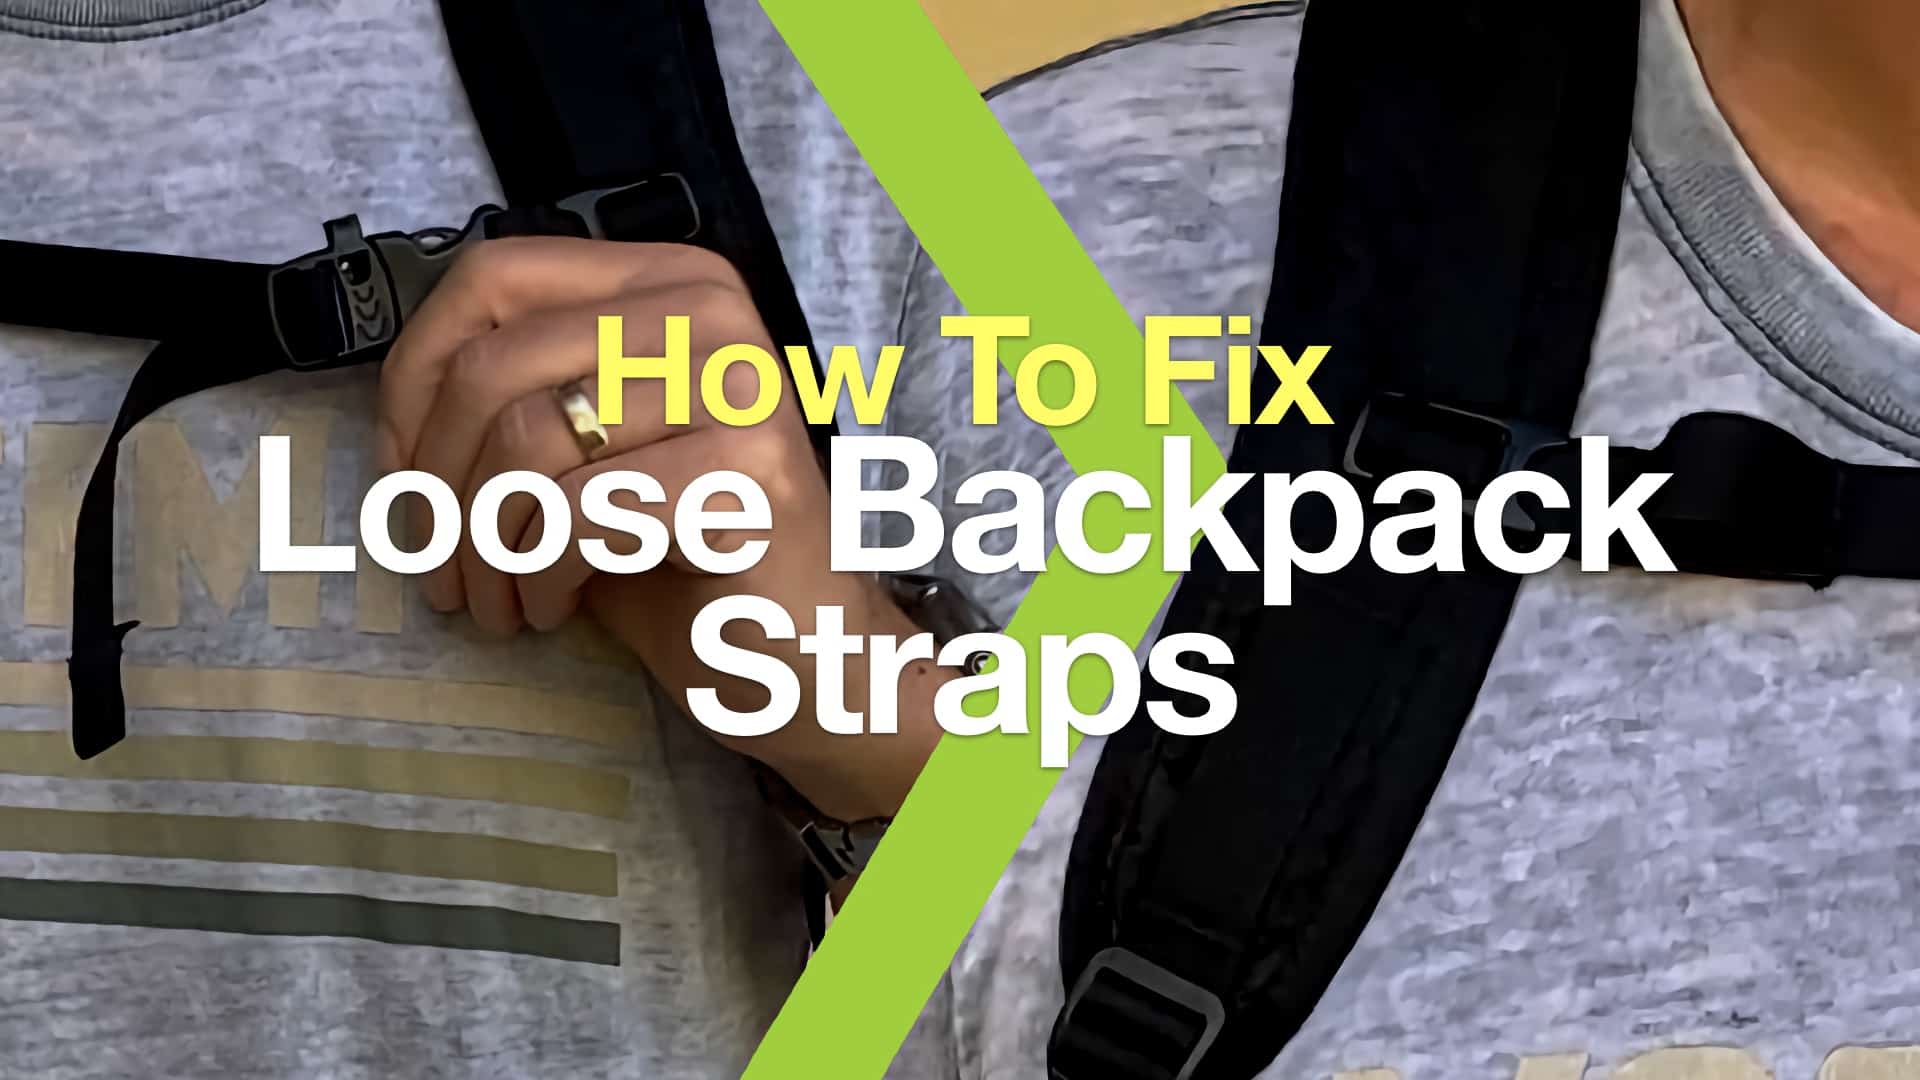 How to repair your schoolbag? Simple tips and tricks